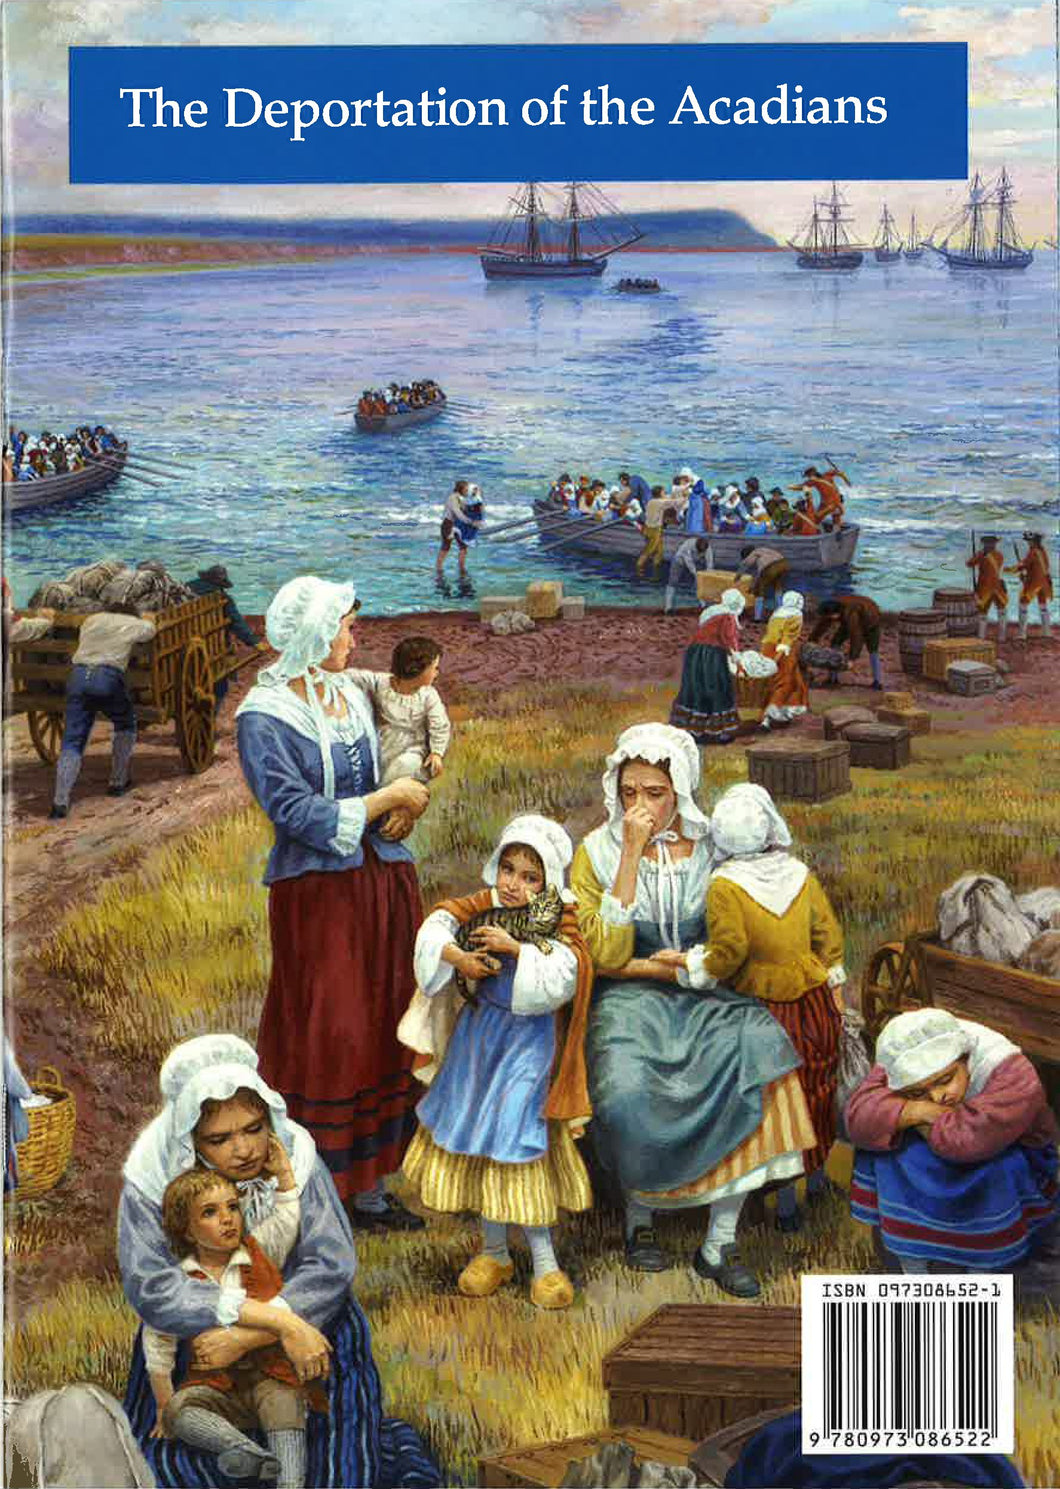 The Deportation of the Acadians